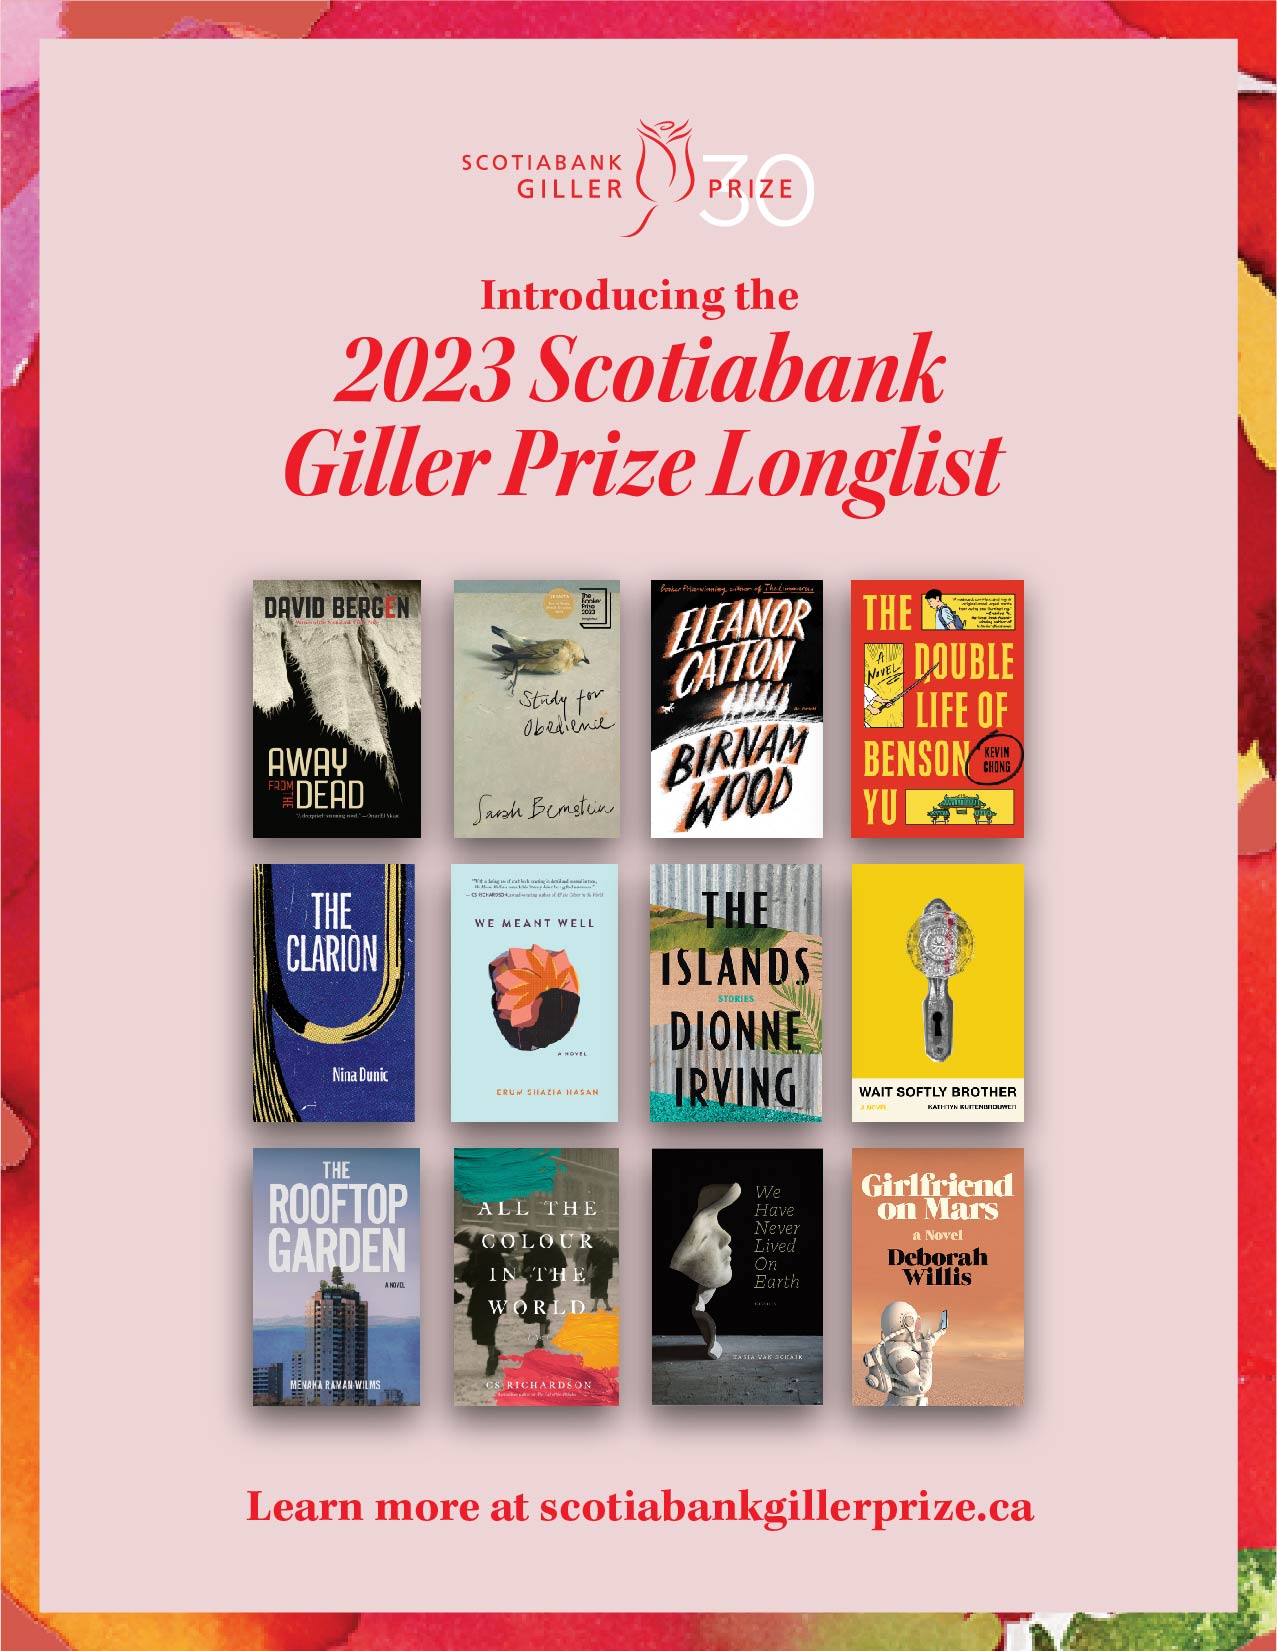 2023 Scotiabank Giller Prize Longlist - 8.5x11 poster